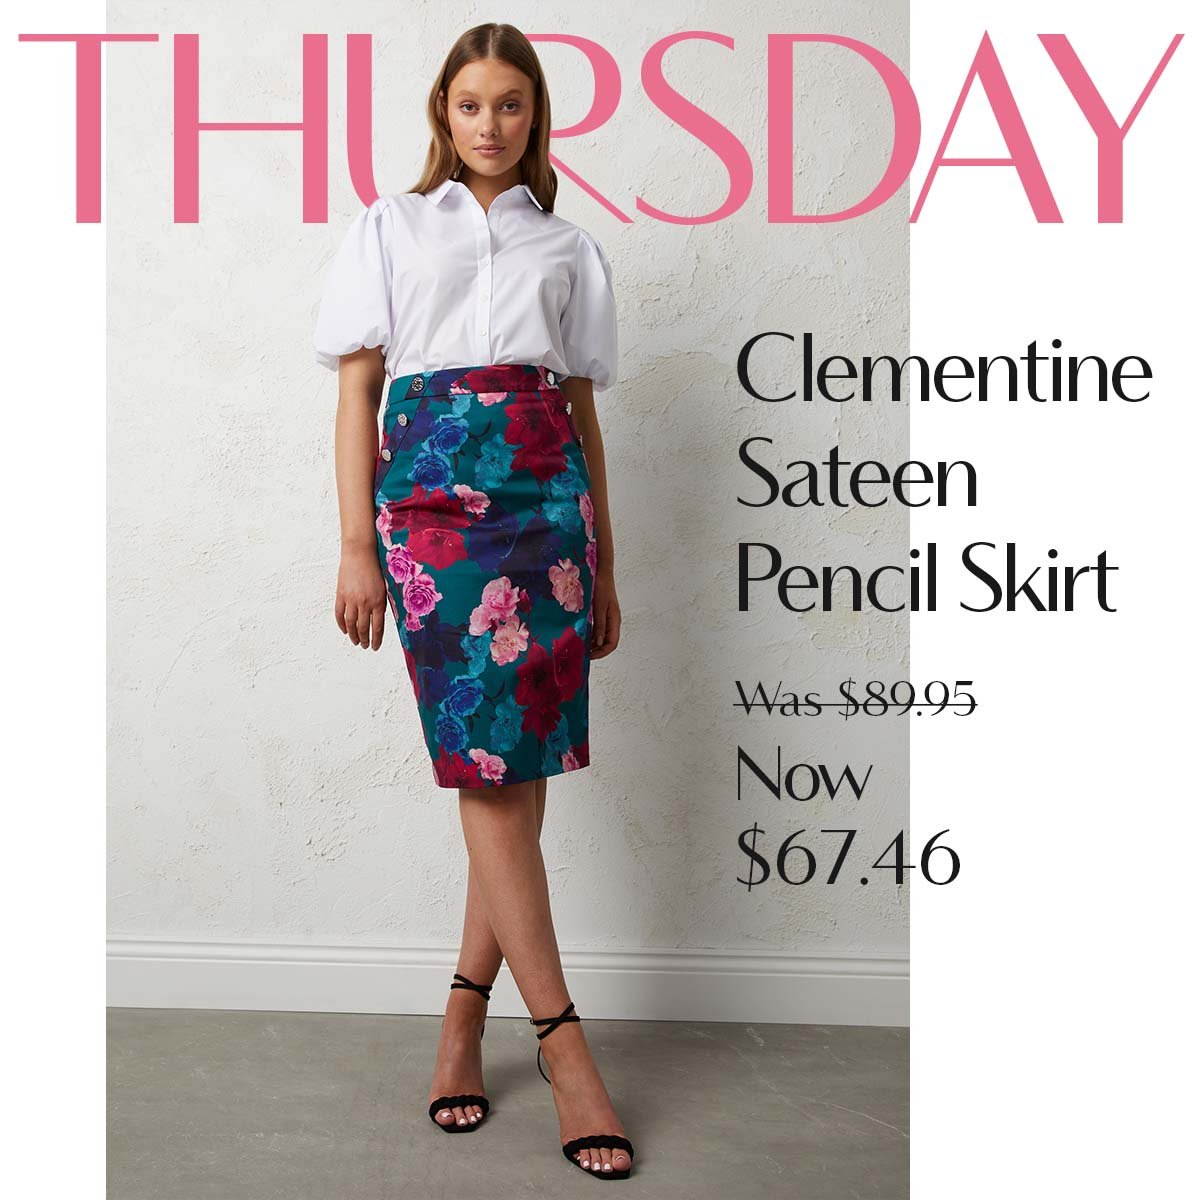 Thursday. Clementine Sateen Pencil Skirt  Was $89.95 Now $67.46